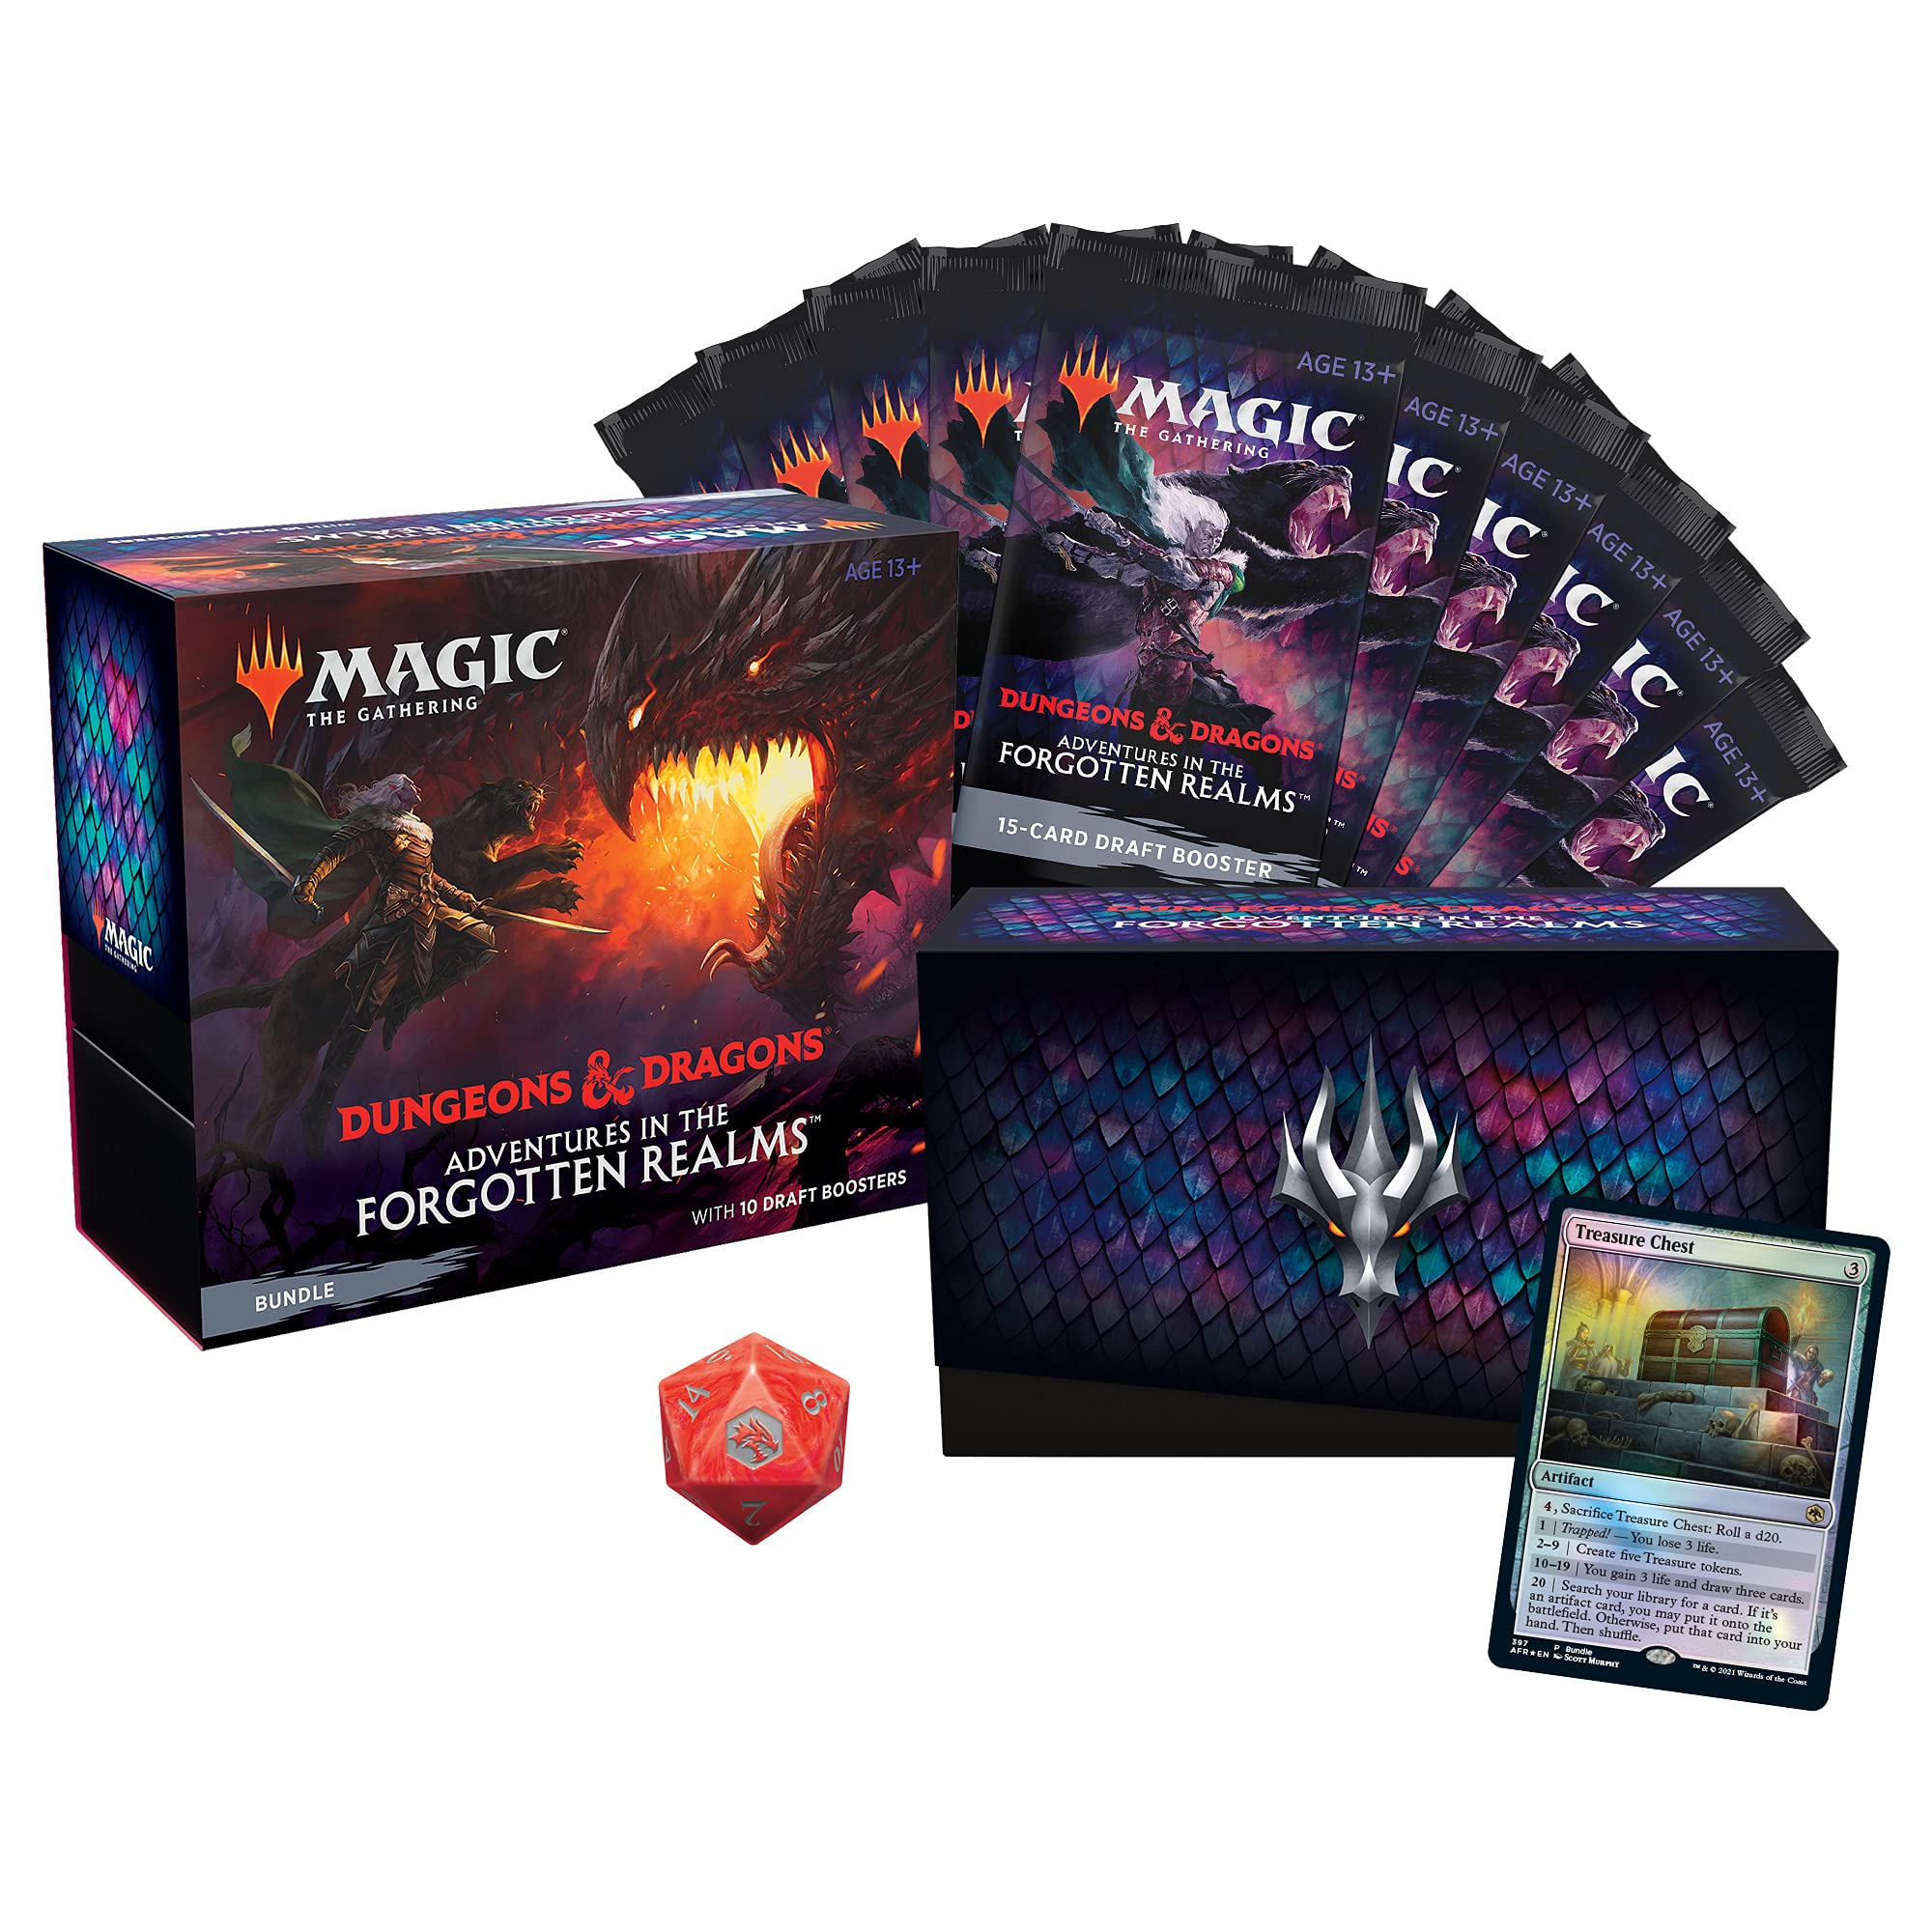 Magic The Gathering Adventures in The Forgotten Realms Bundle | 10 Draft Boosters (150 Magic Cards) + Accessories